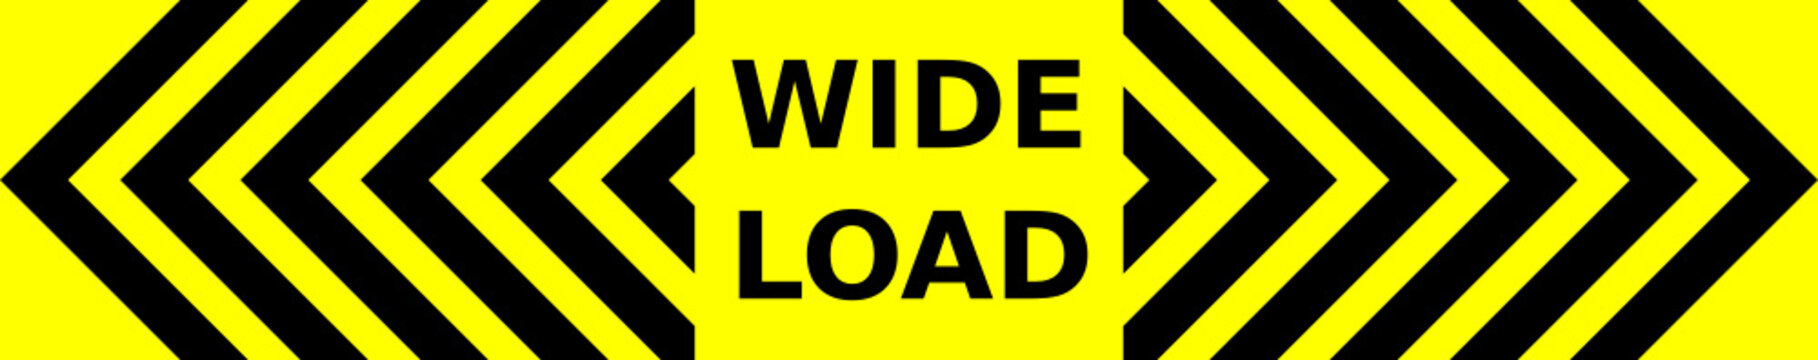 Black and yellow vector graphic of outward pointing chevrons and text saying Wide Load. It would serve as a warning to drivers approaching lorries from he rear